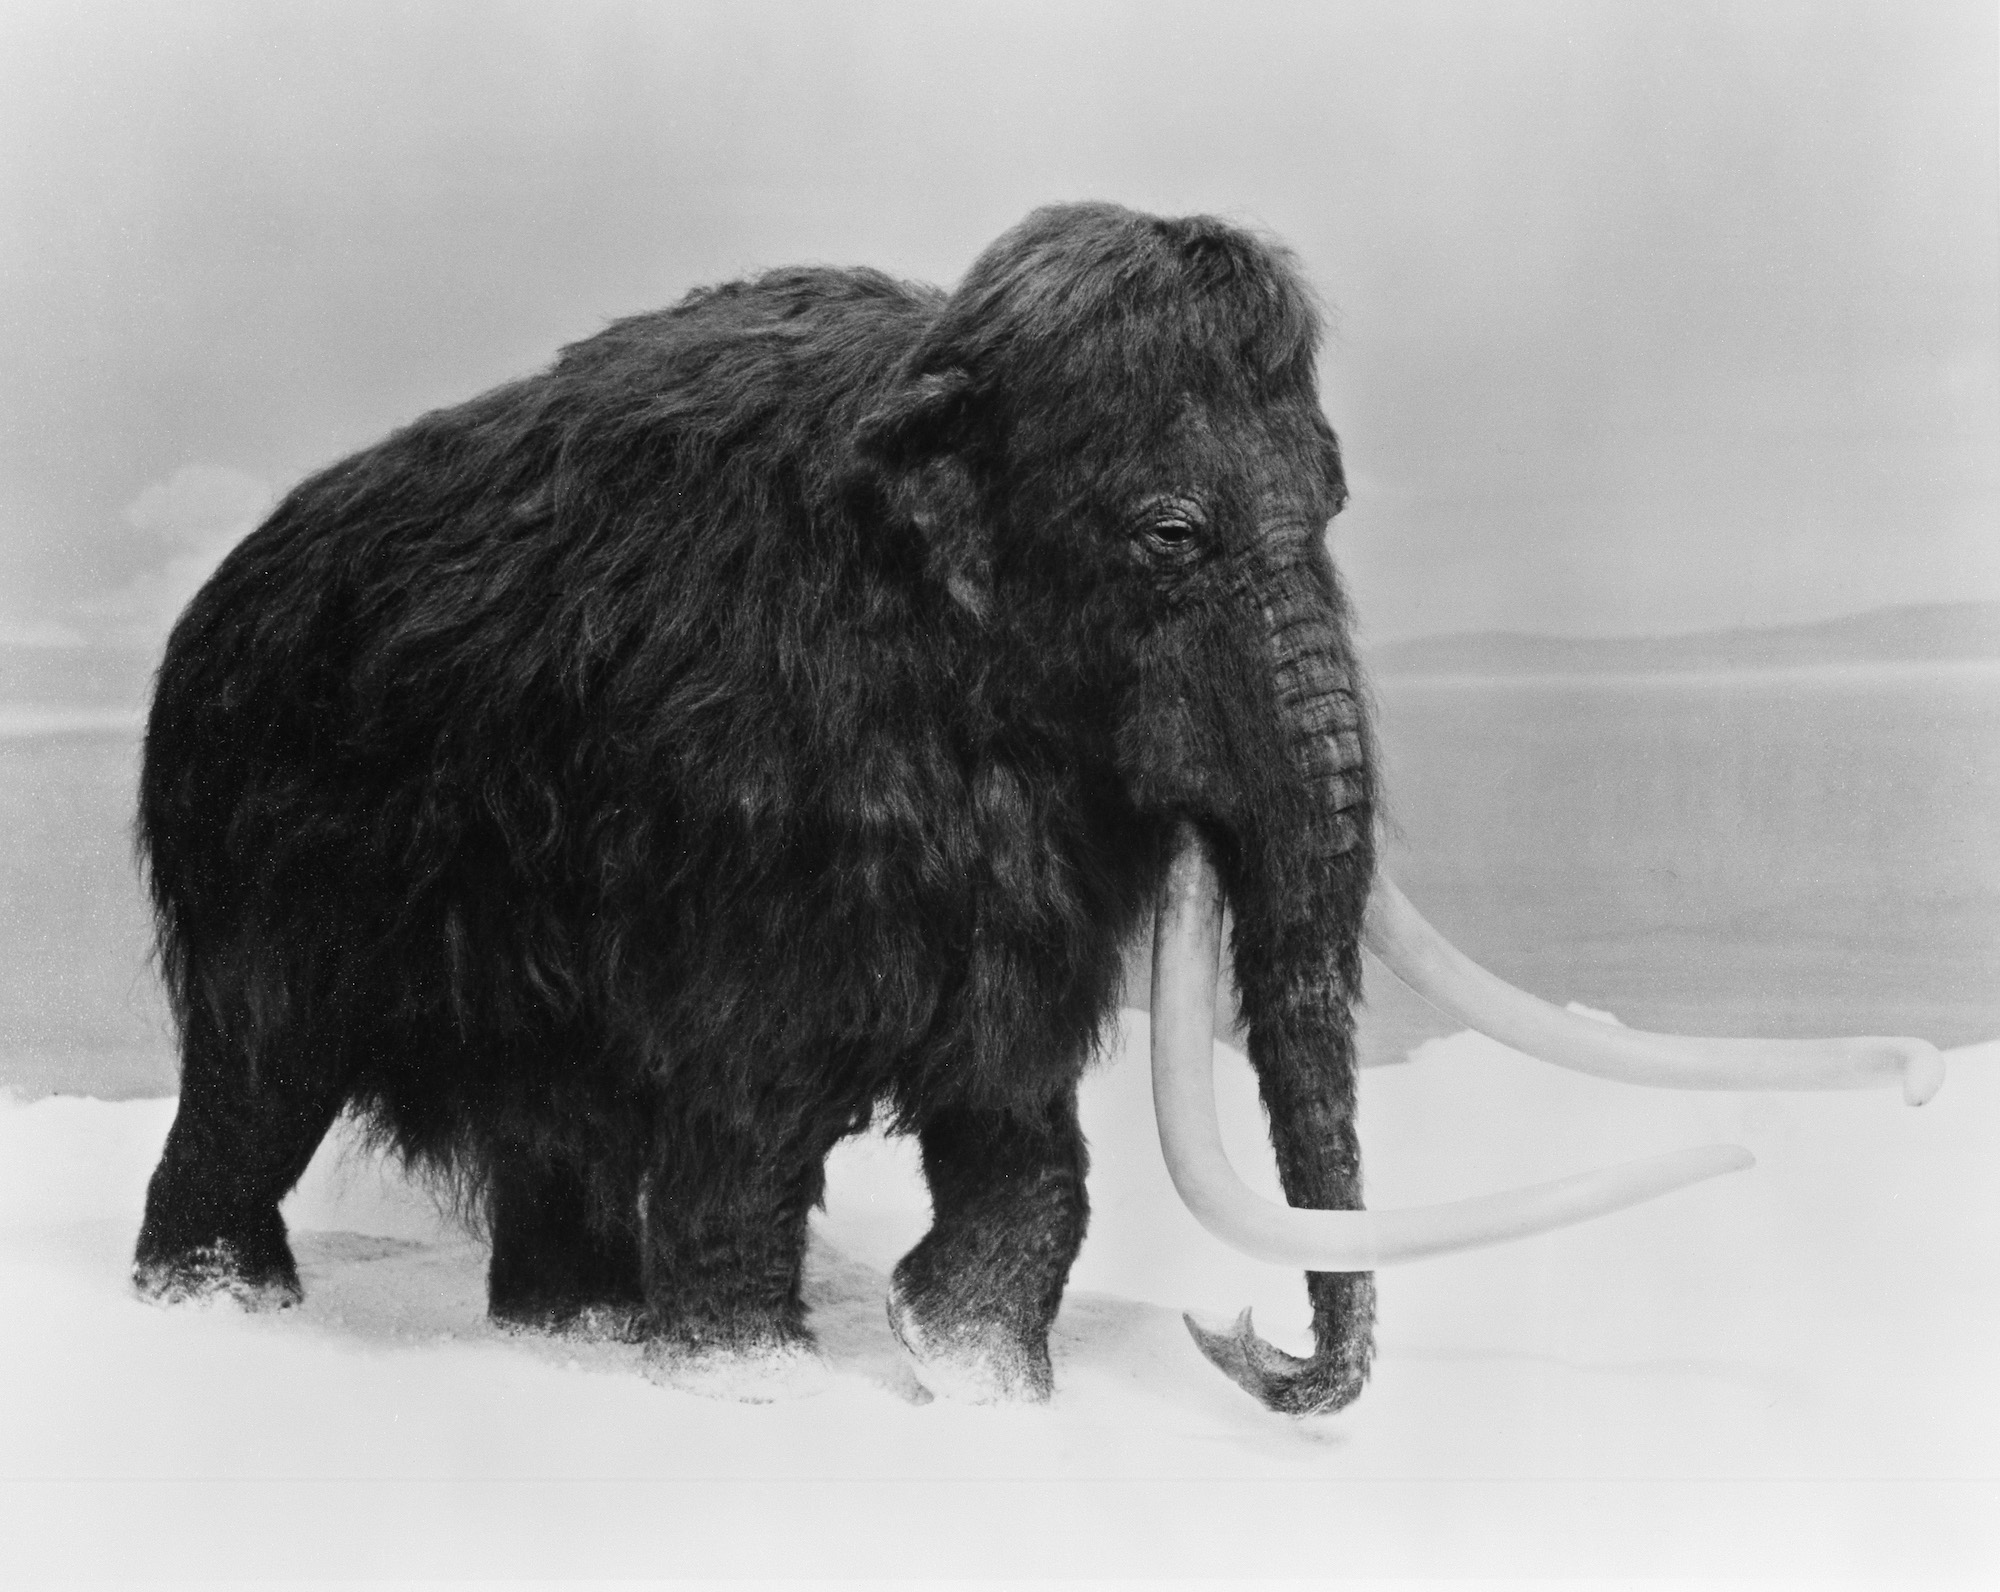 We Could Resurrect the Woolly Mammoth. Here’s How